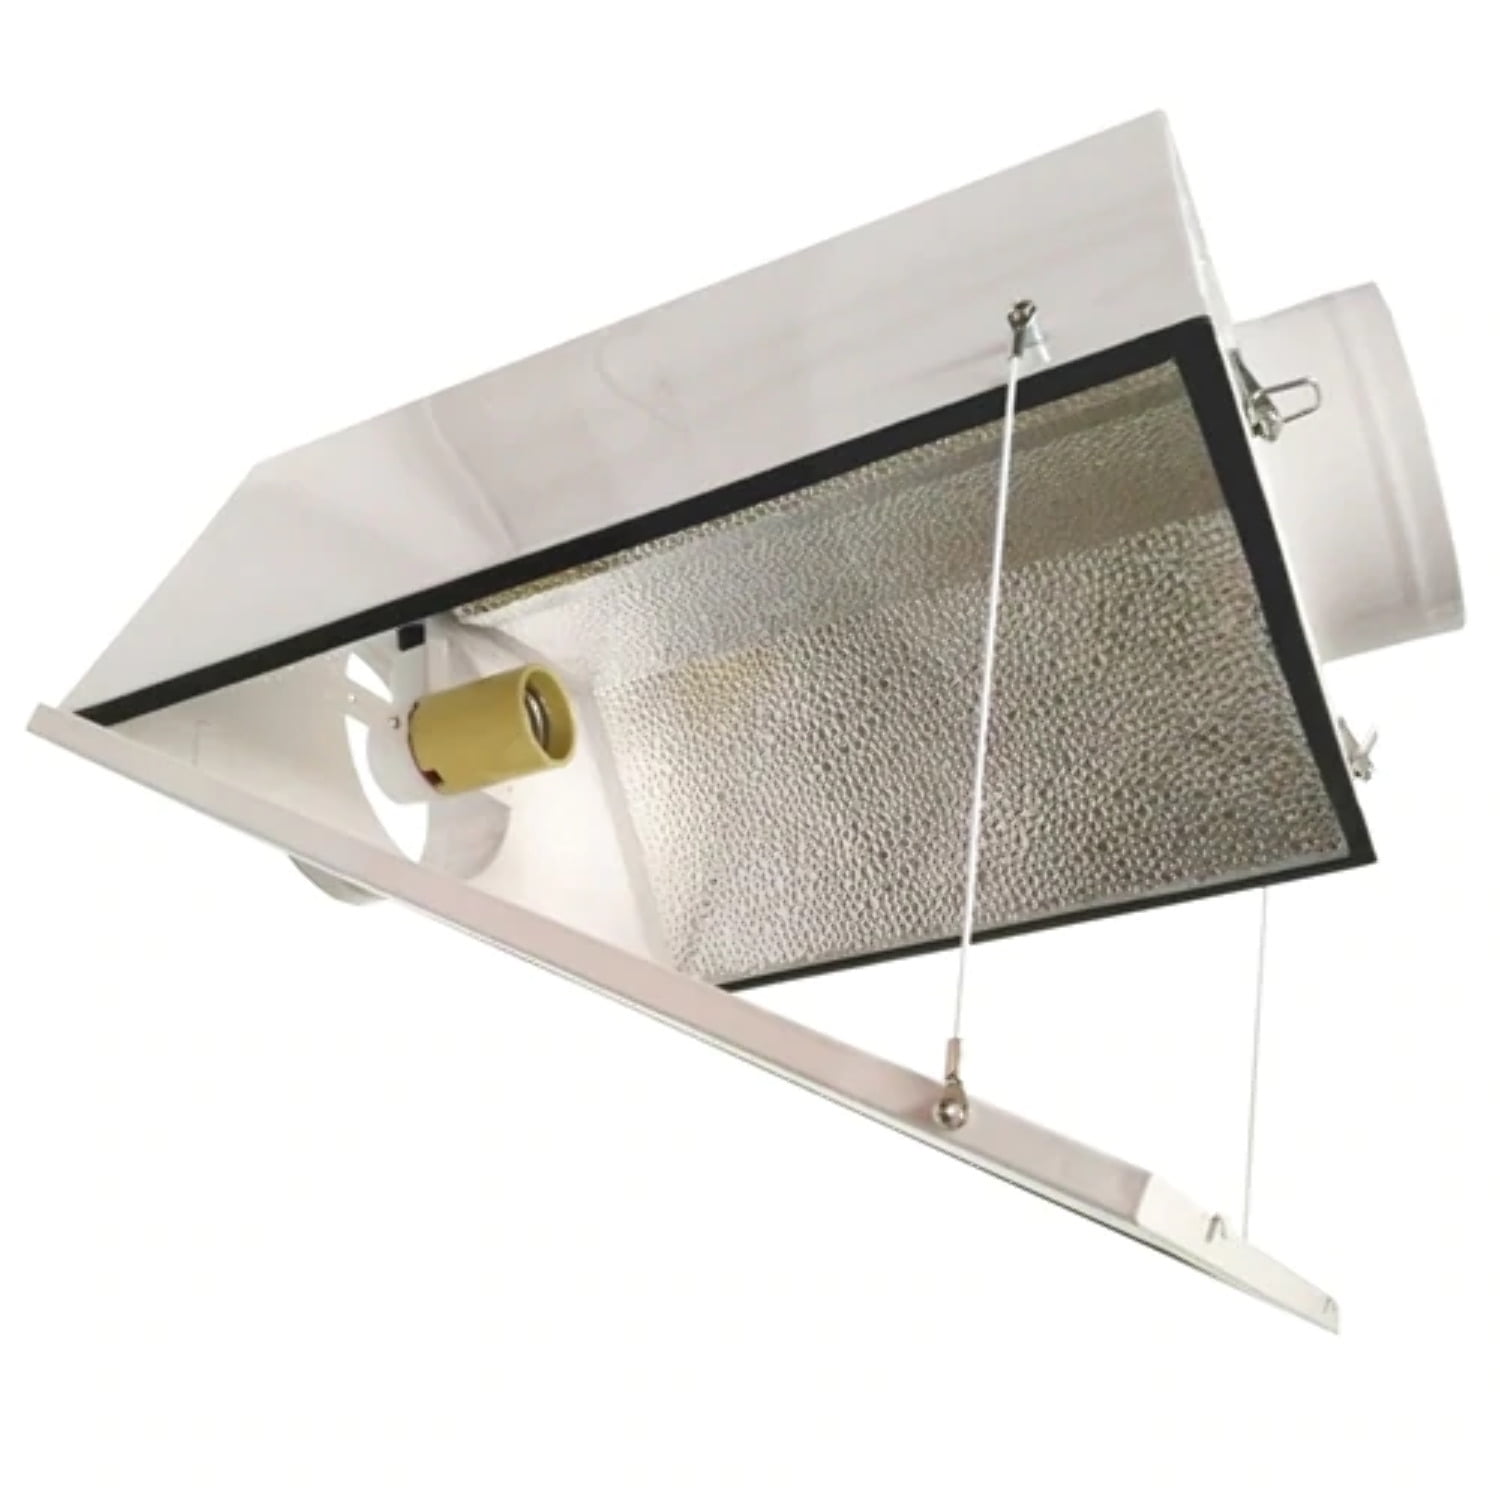 Hydro Crunch Large Air Cooled with Duct Glass Panel Grow Light Reflector - Walmart.com